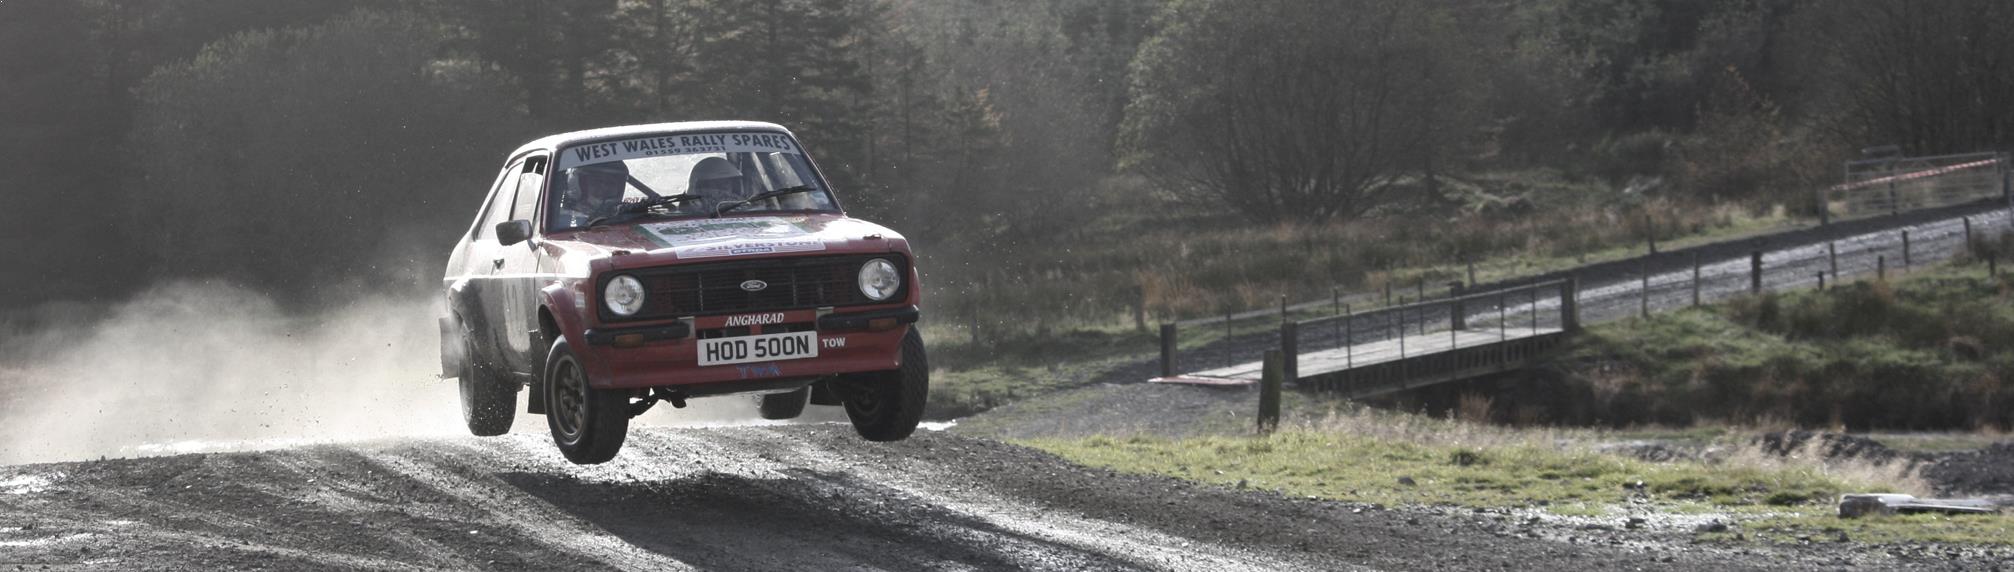 Mid Wales Stages - Background